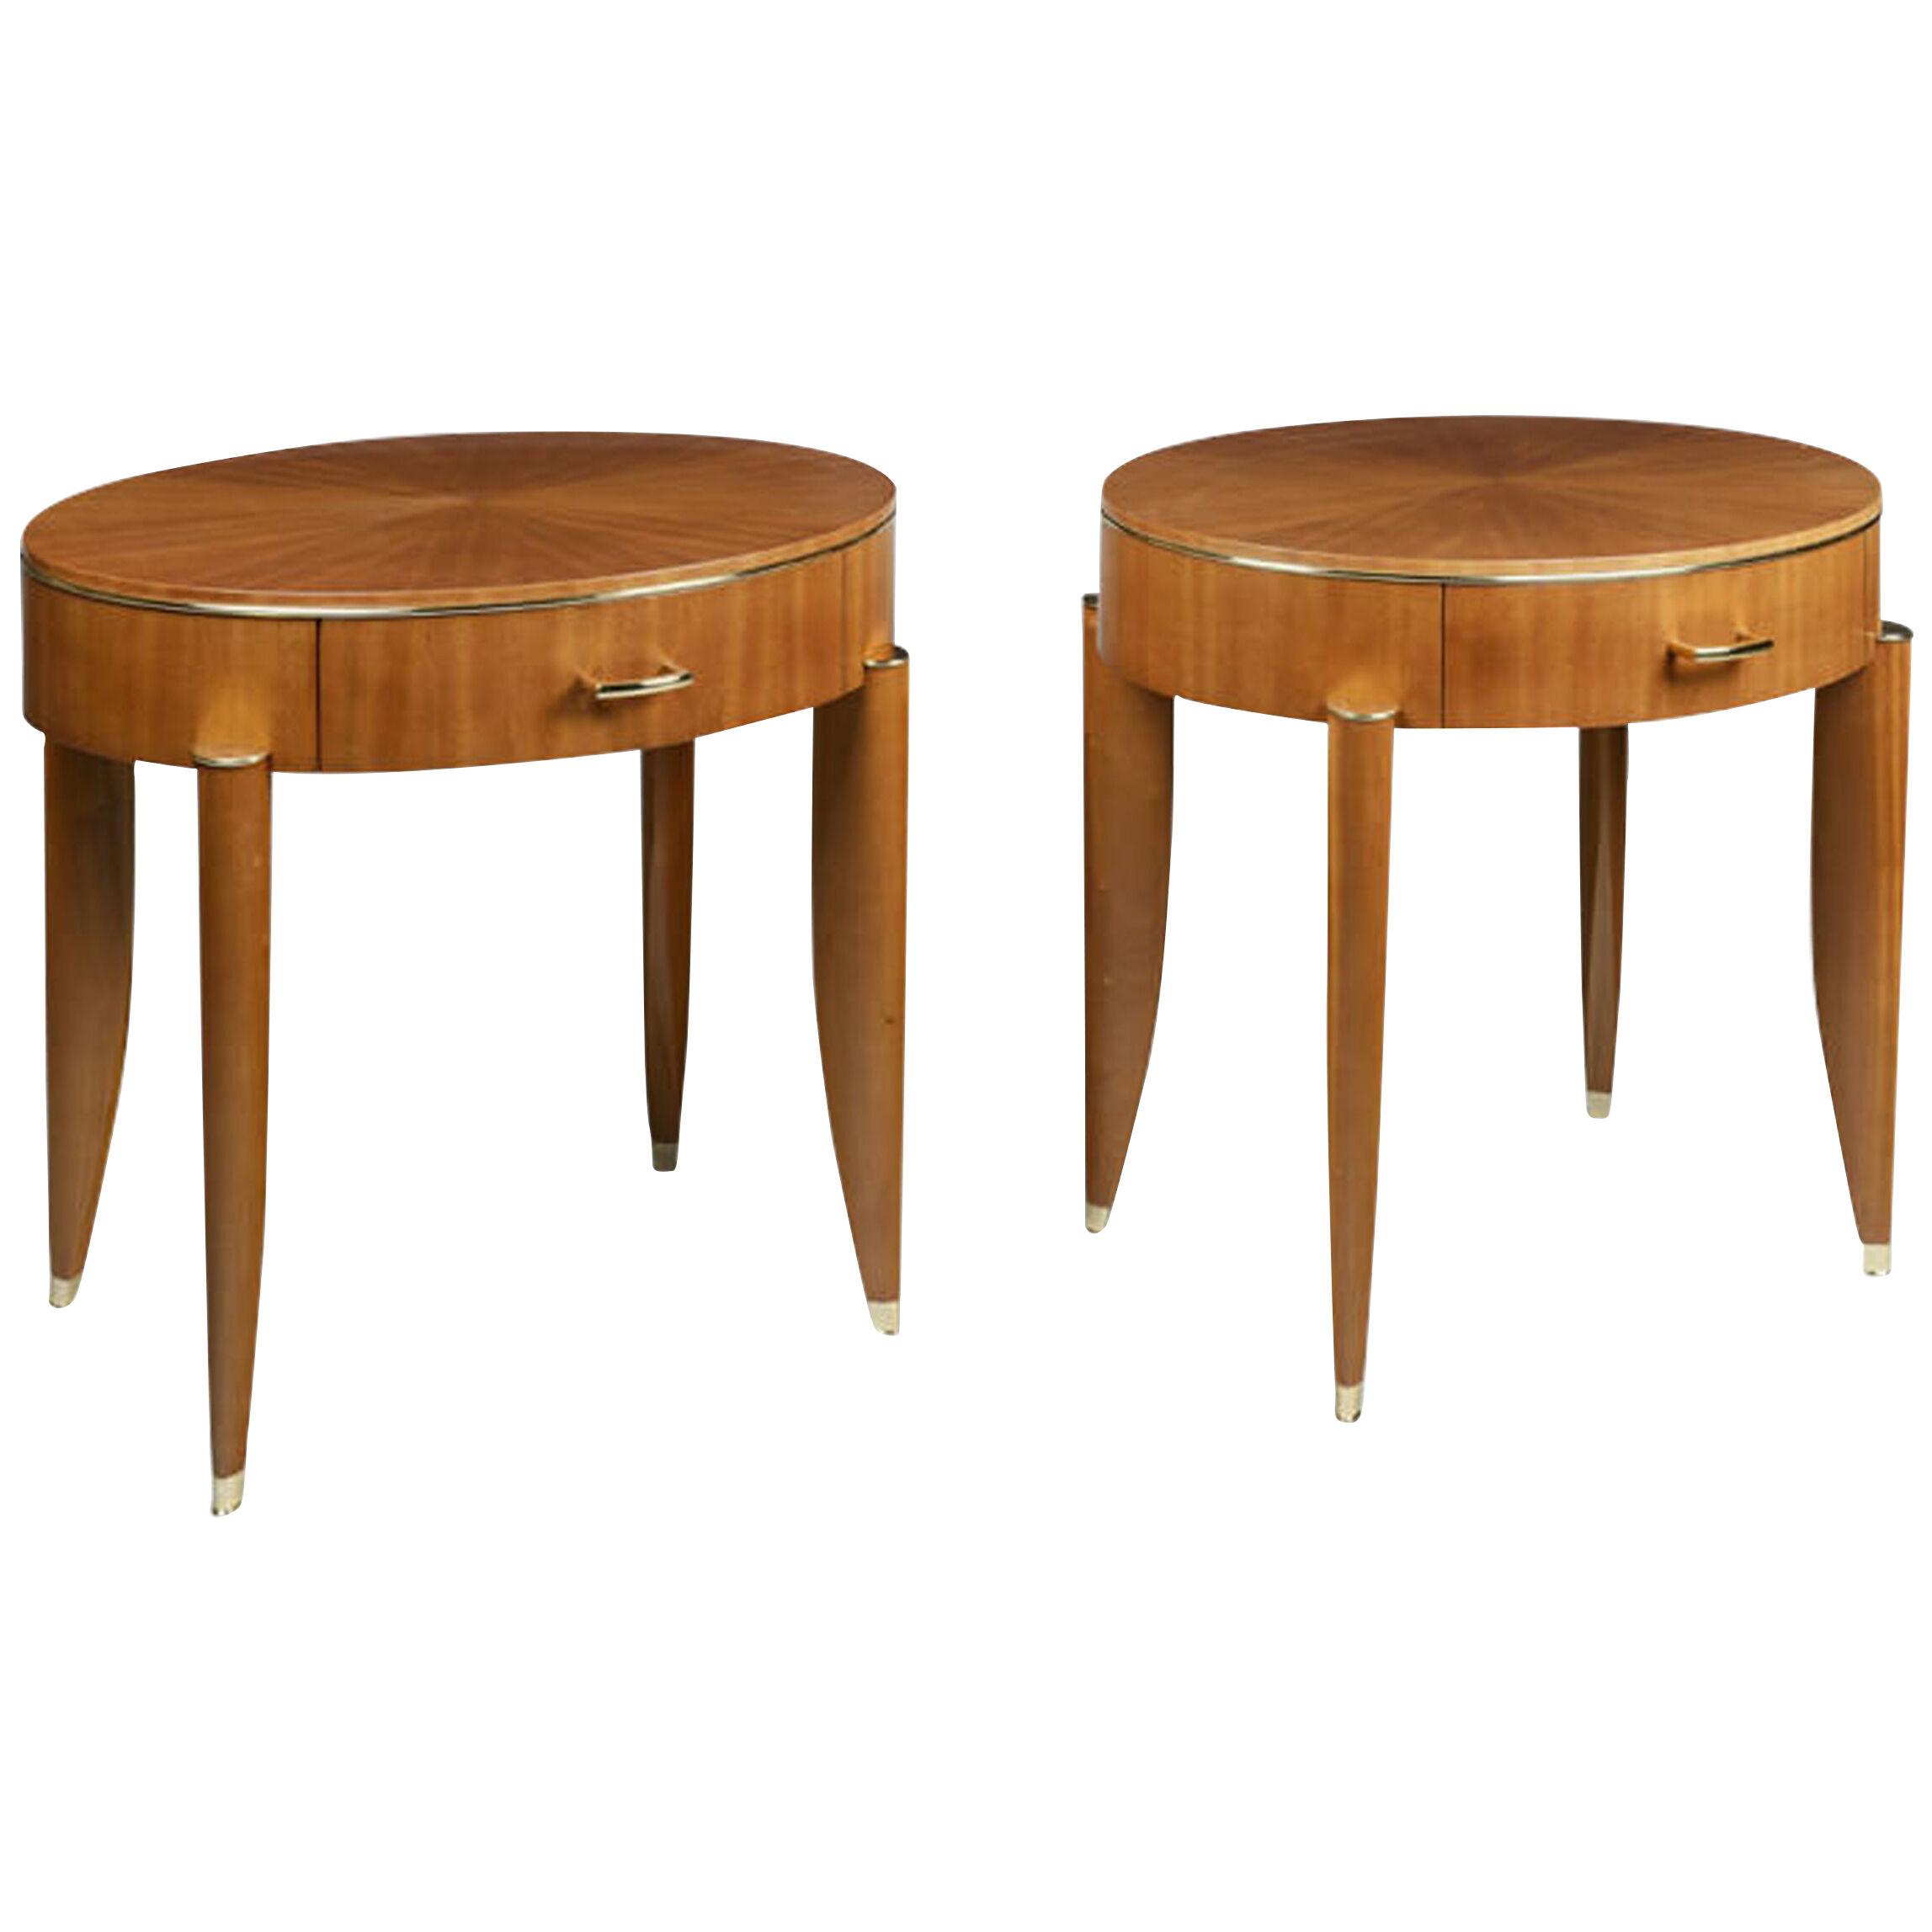 French Art Deco Inspired Side Tables